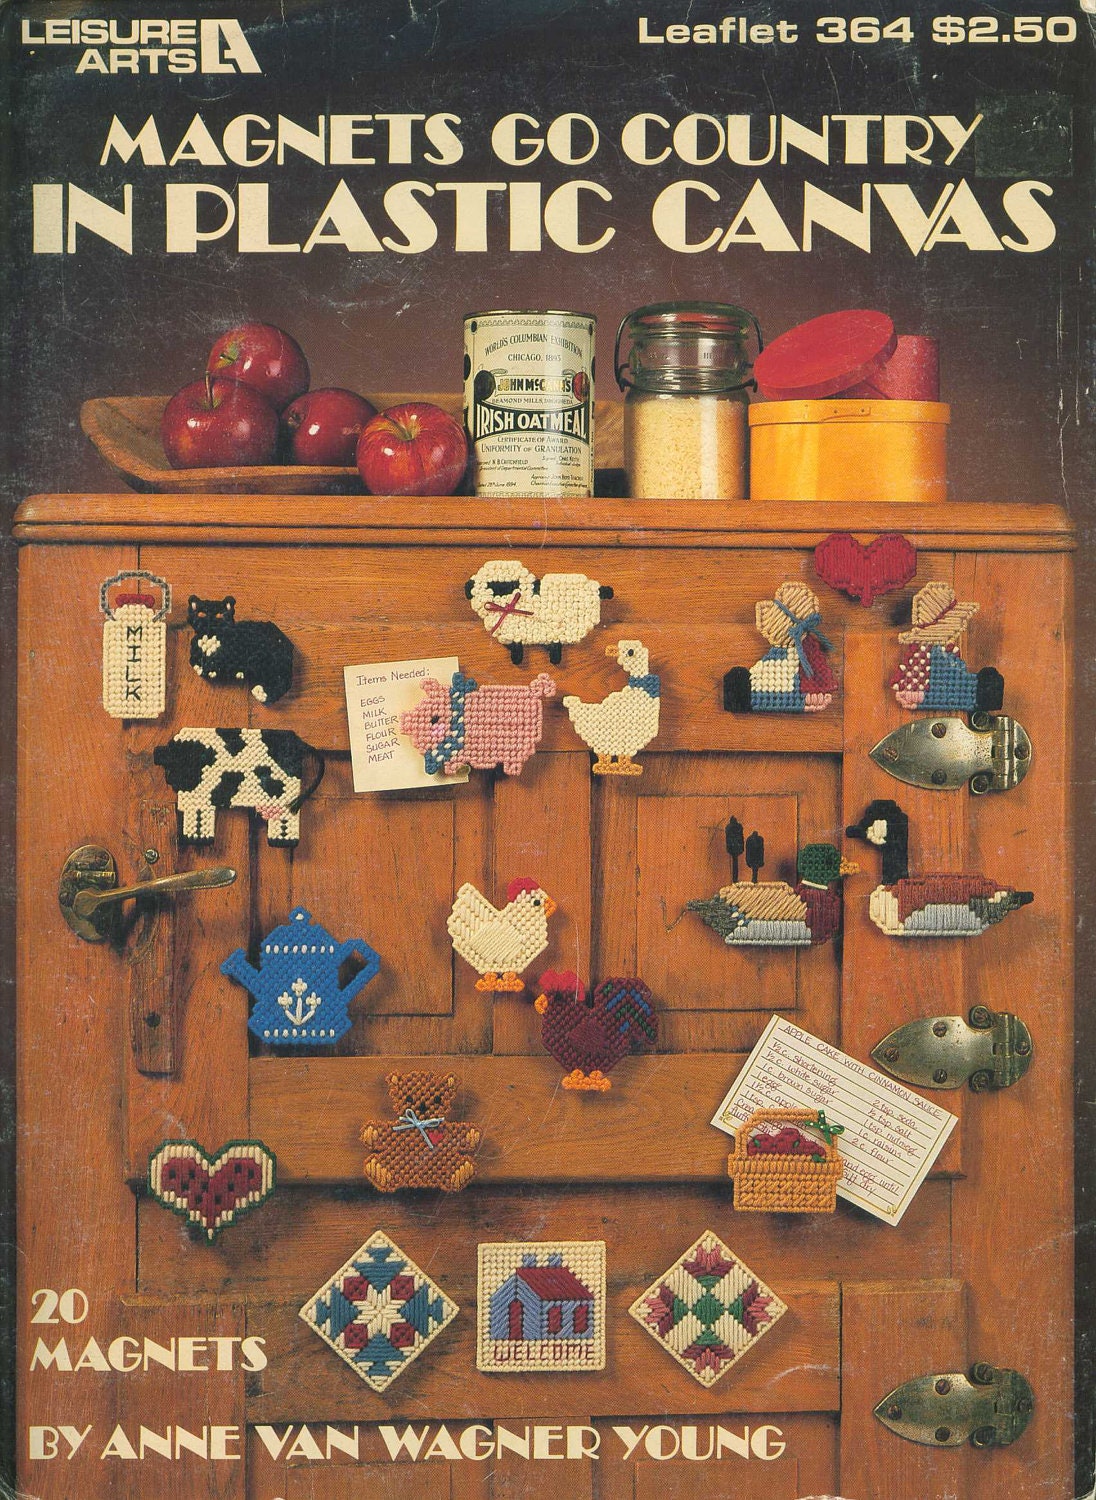 Magnets Go Country in Plastic Canvas, leaflet 364 from Leisure Arts - MastersCreations